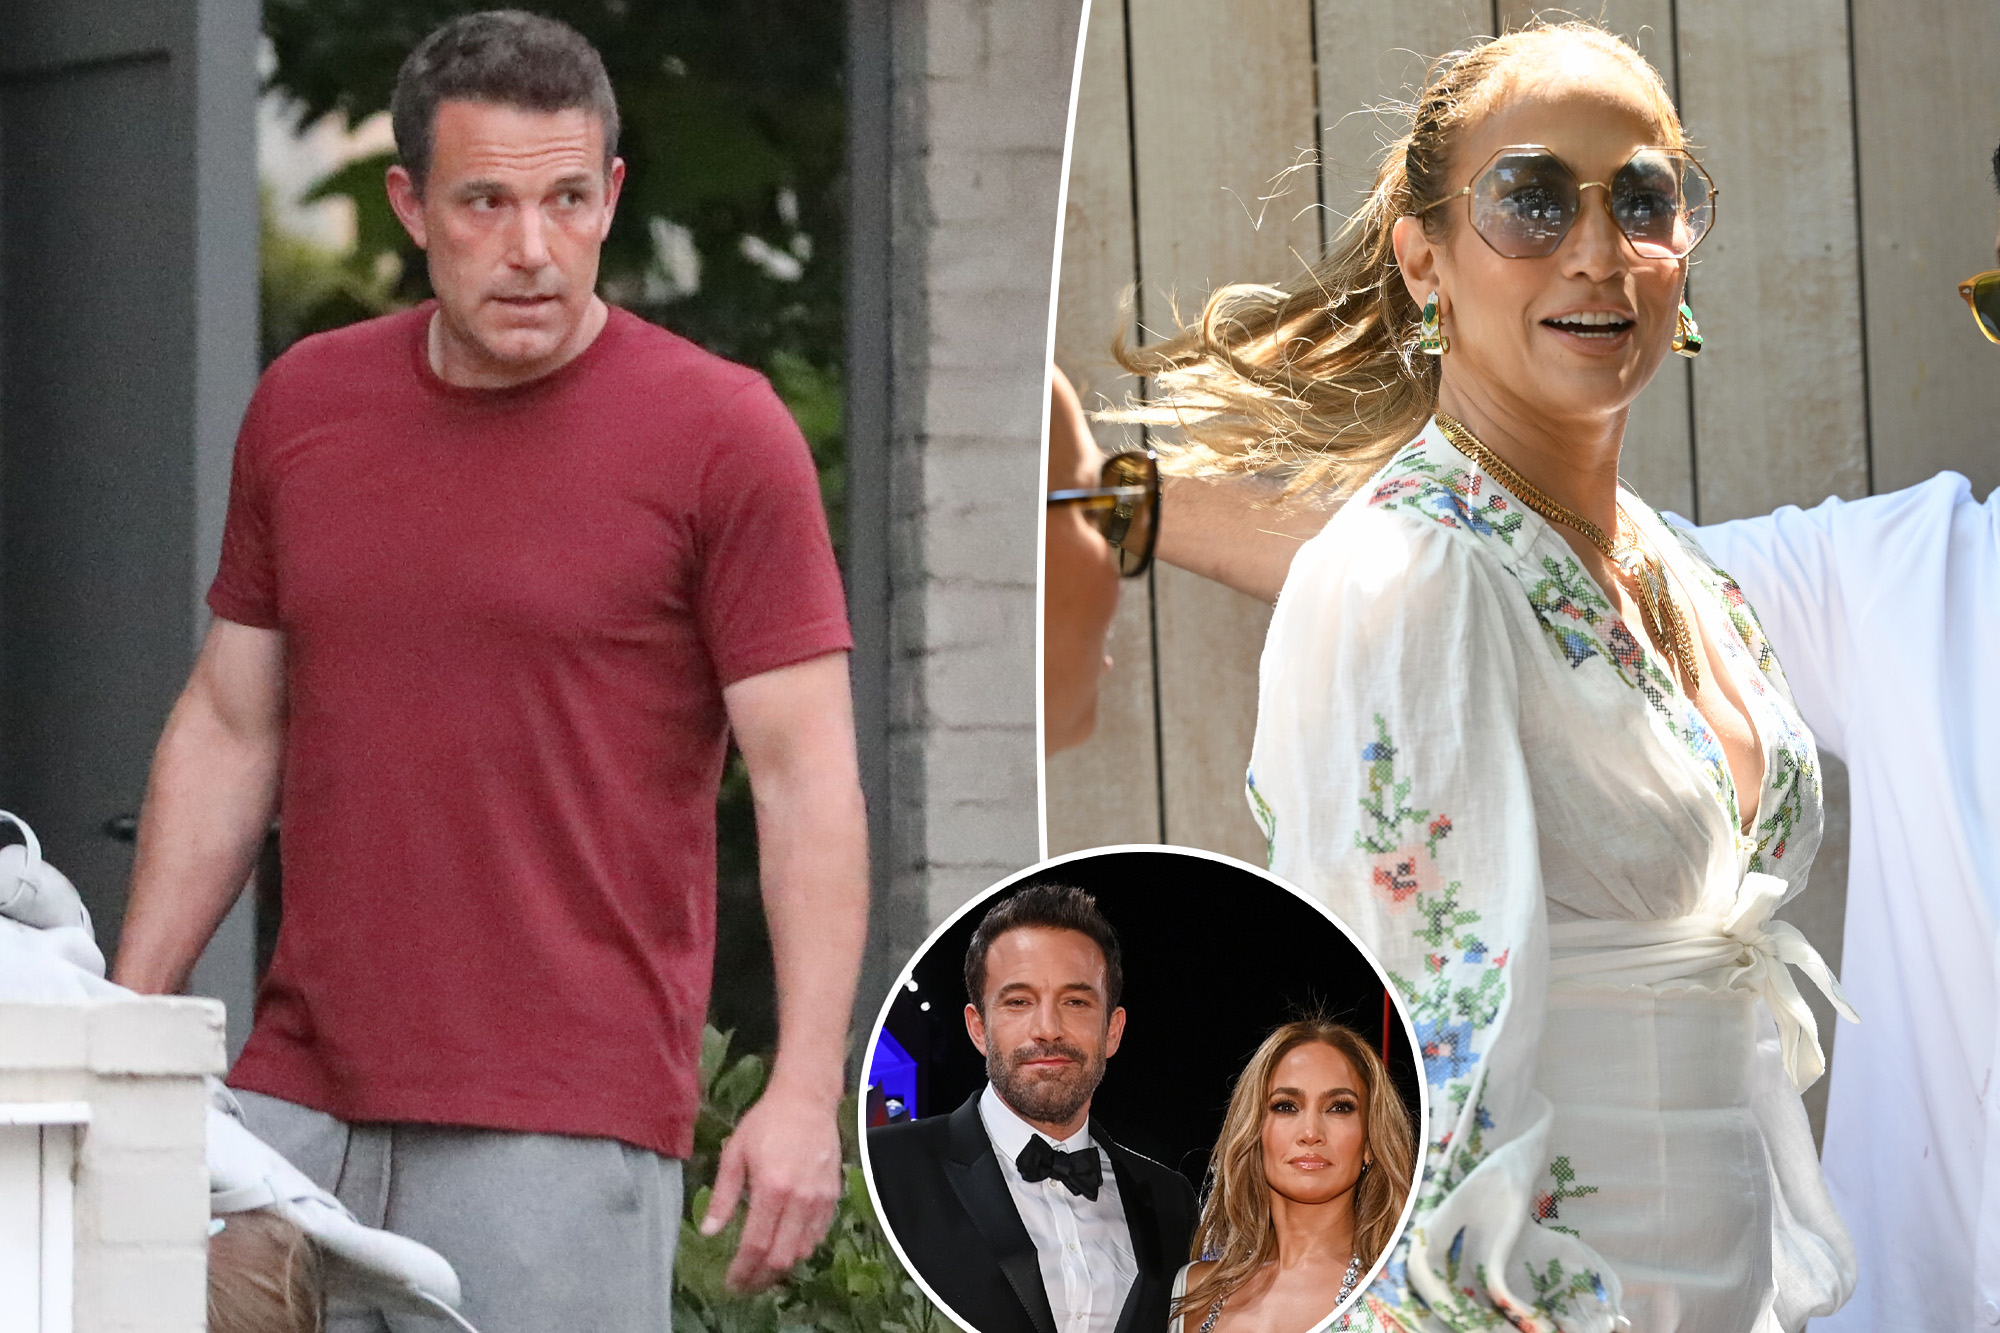 Ben Affleck's Solo Weekend: What He Was Really Up to While J.Lo Celebrated in Style